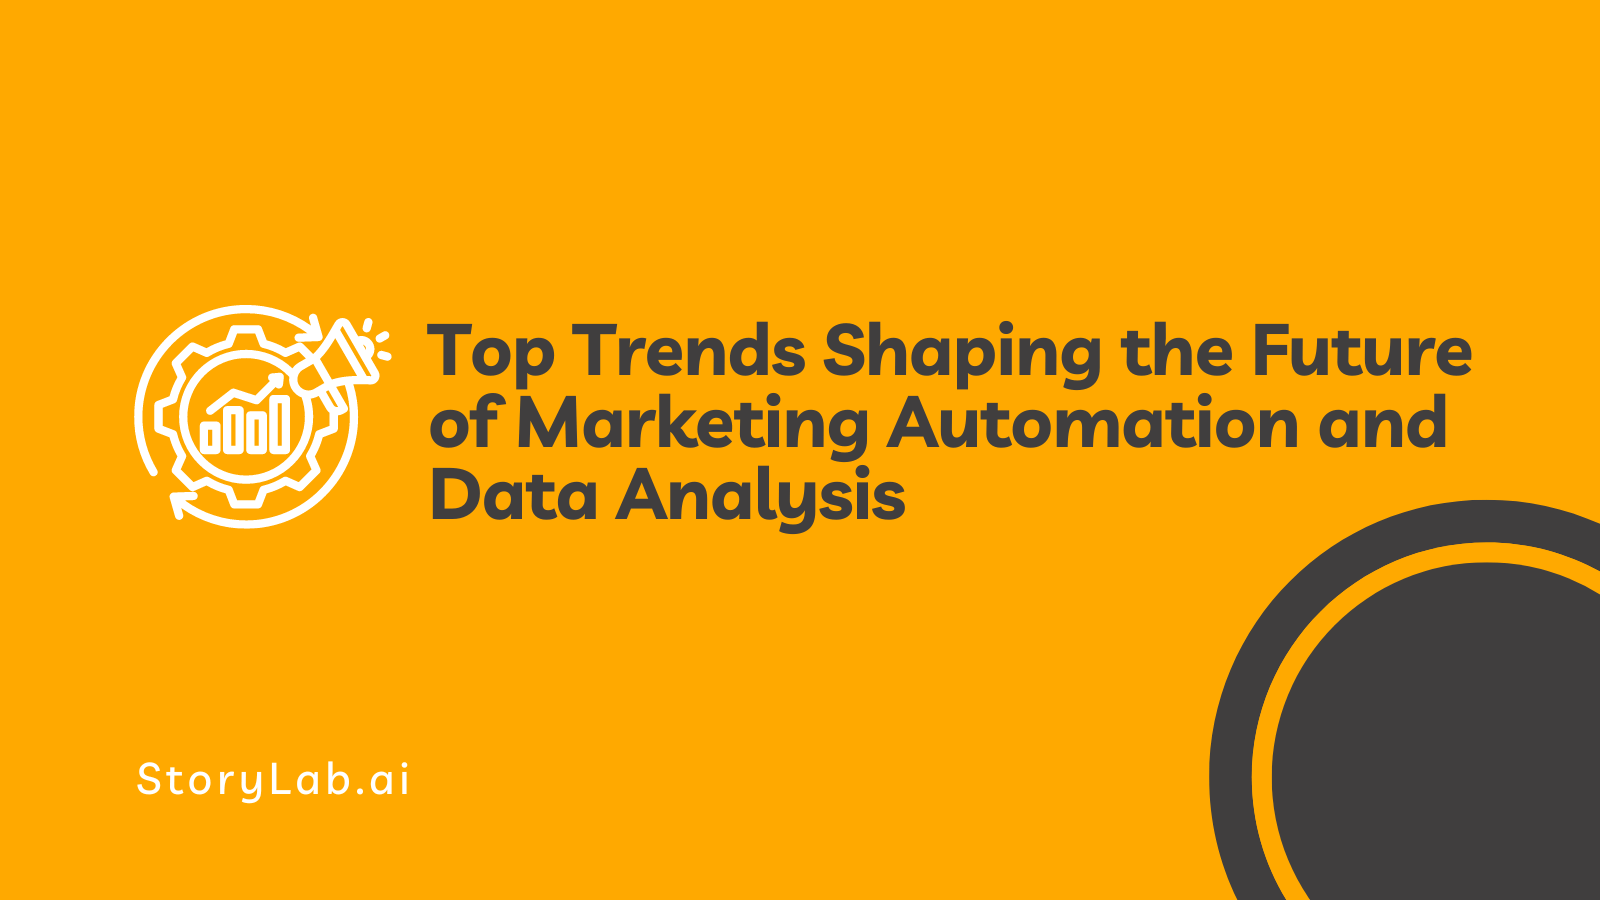 Top Trends Shaping the Future of Marketing Automation and Data Analysis